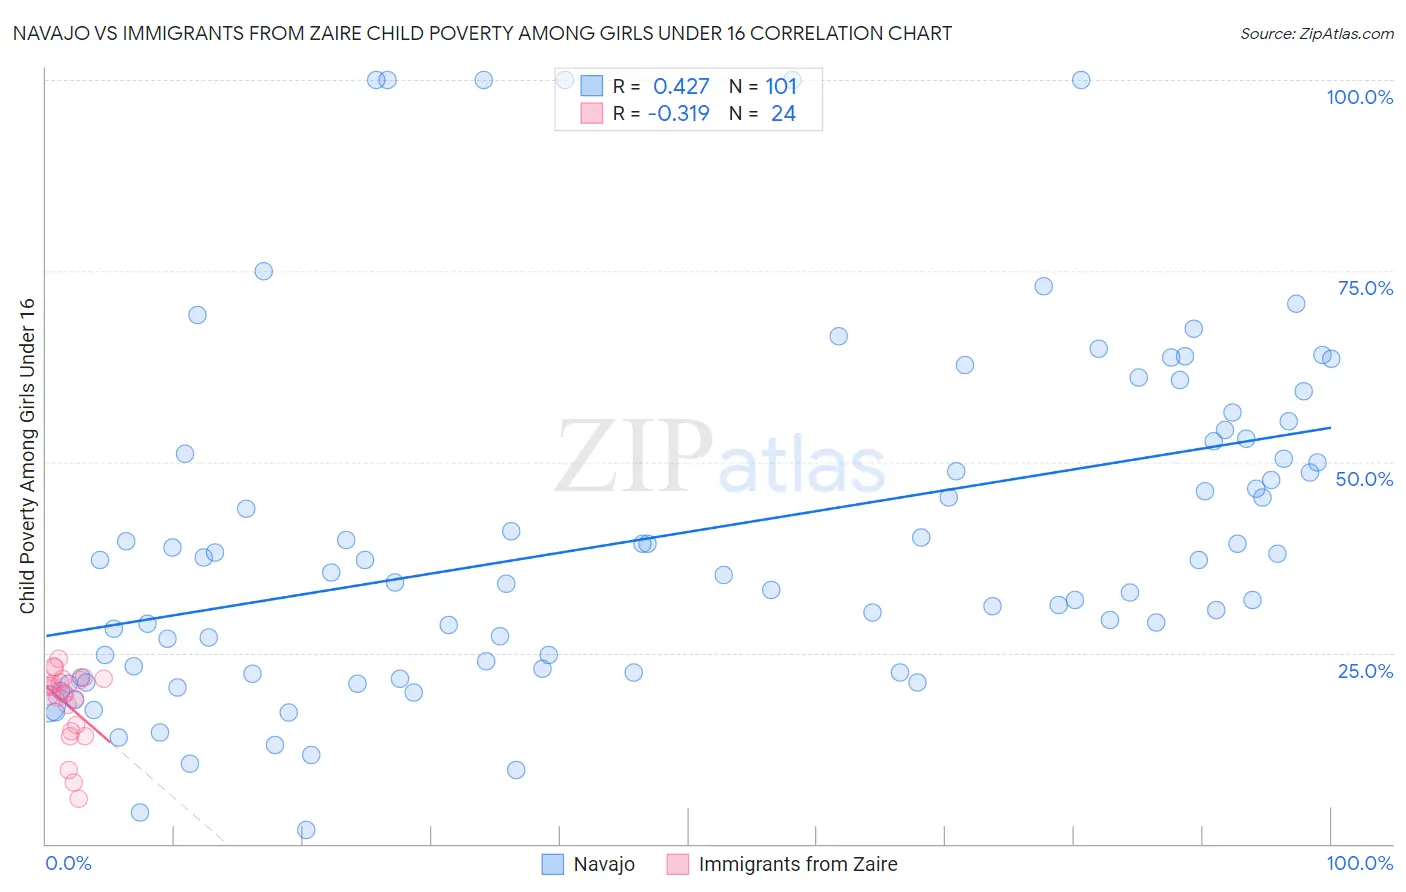 Navajo vs Immigrants from Zaire Child Poverty Among Girls Under 16